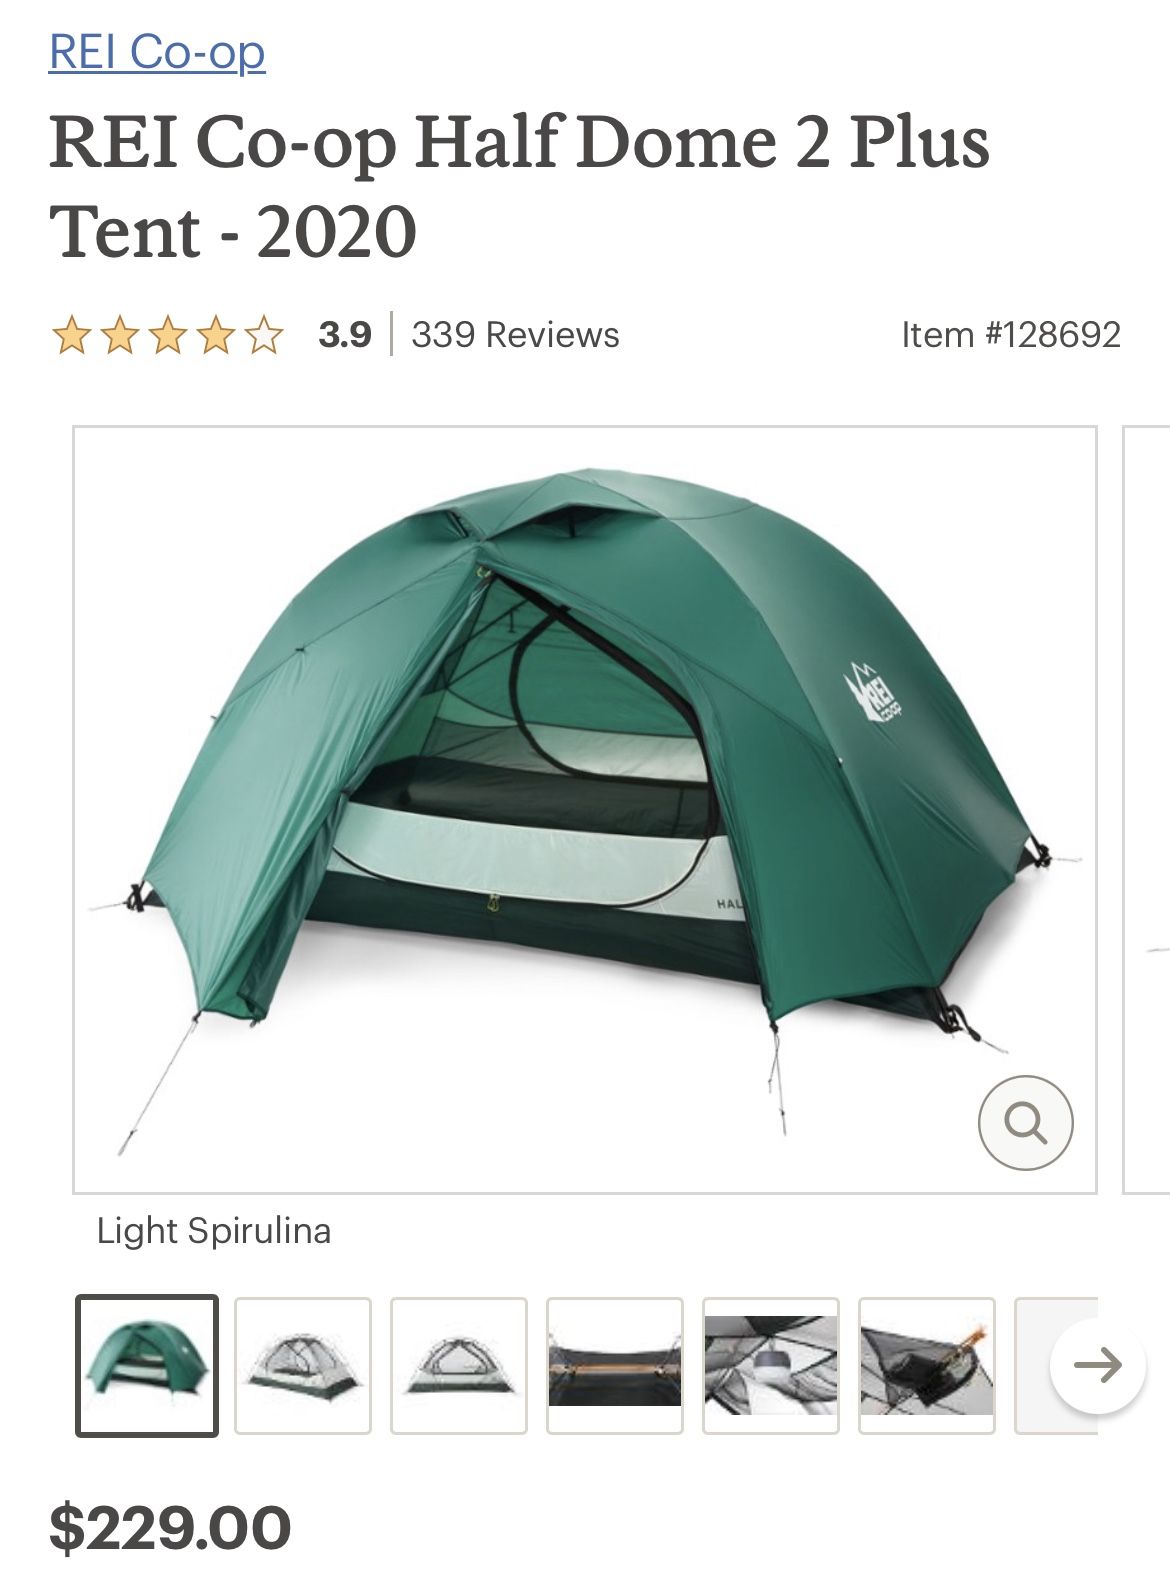 REI Co-op Half Dome 2 Plus Tent - 2020 Brand New